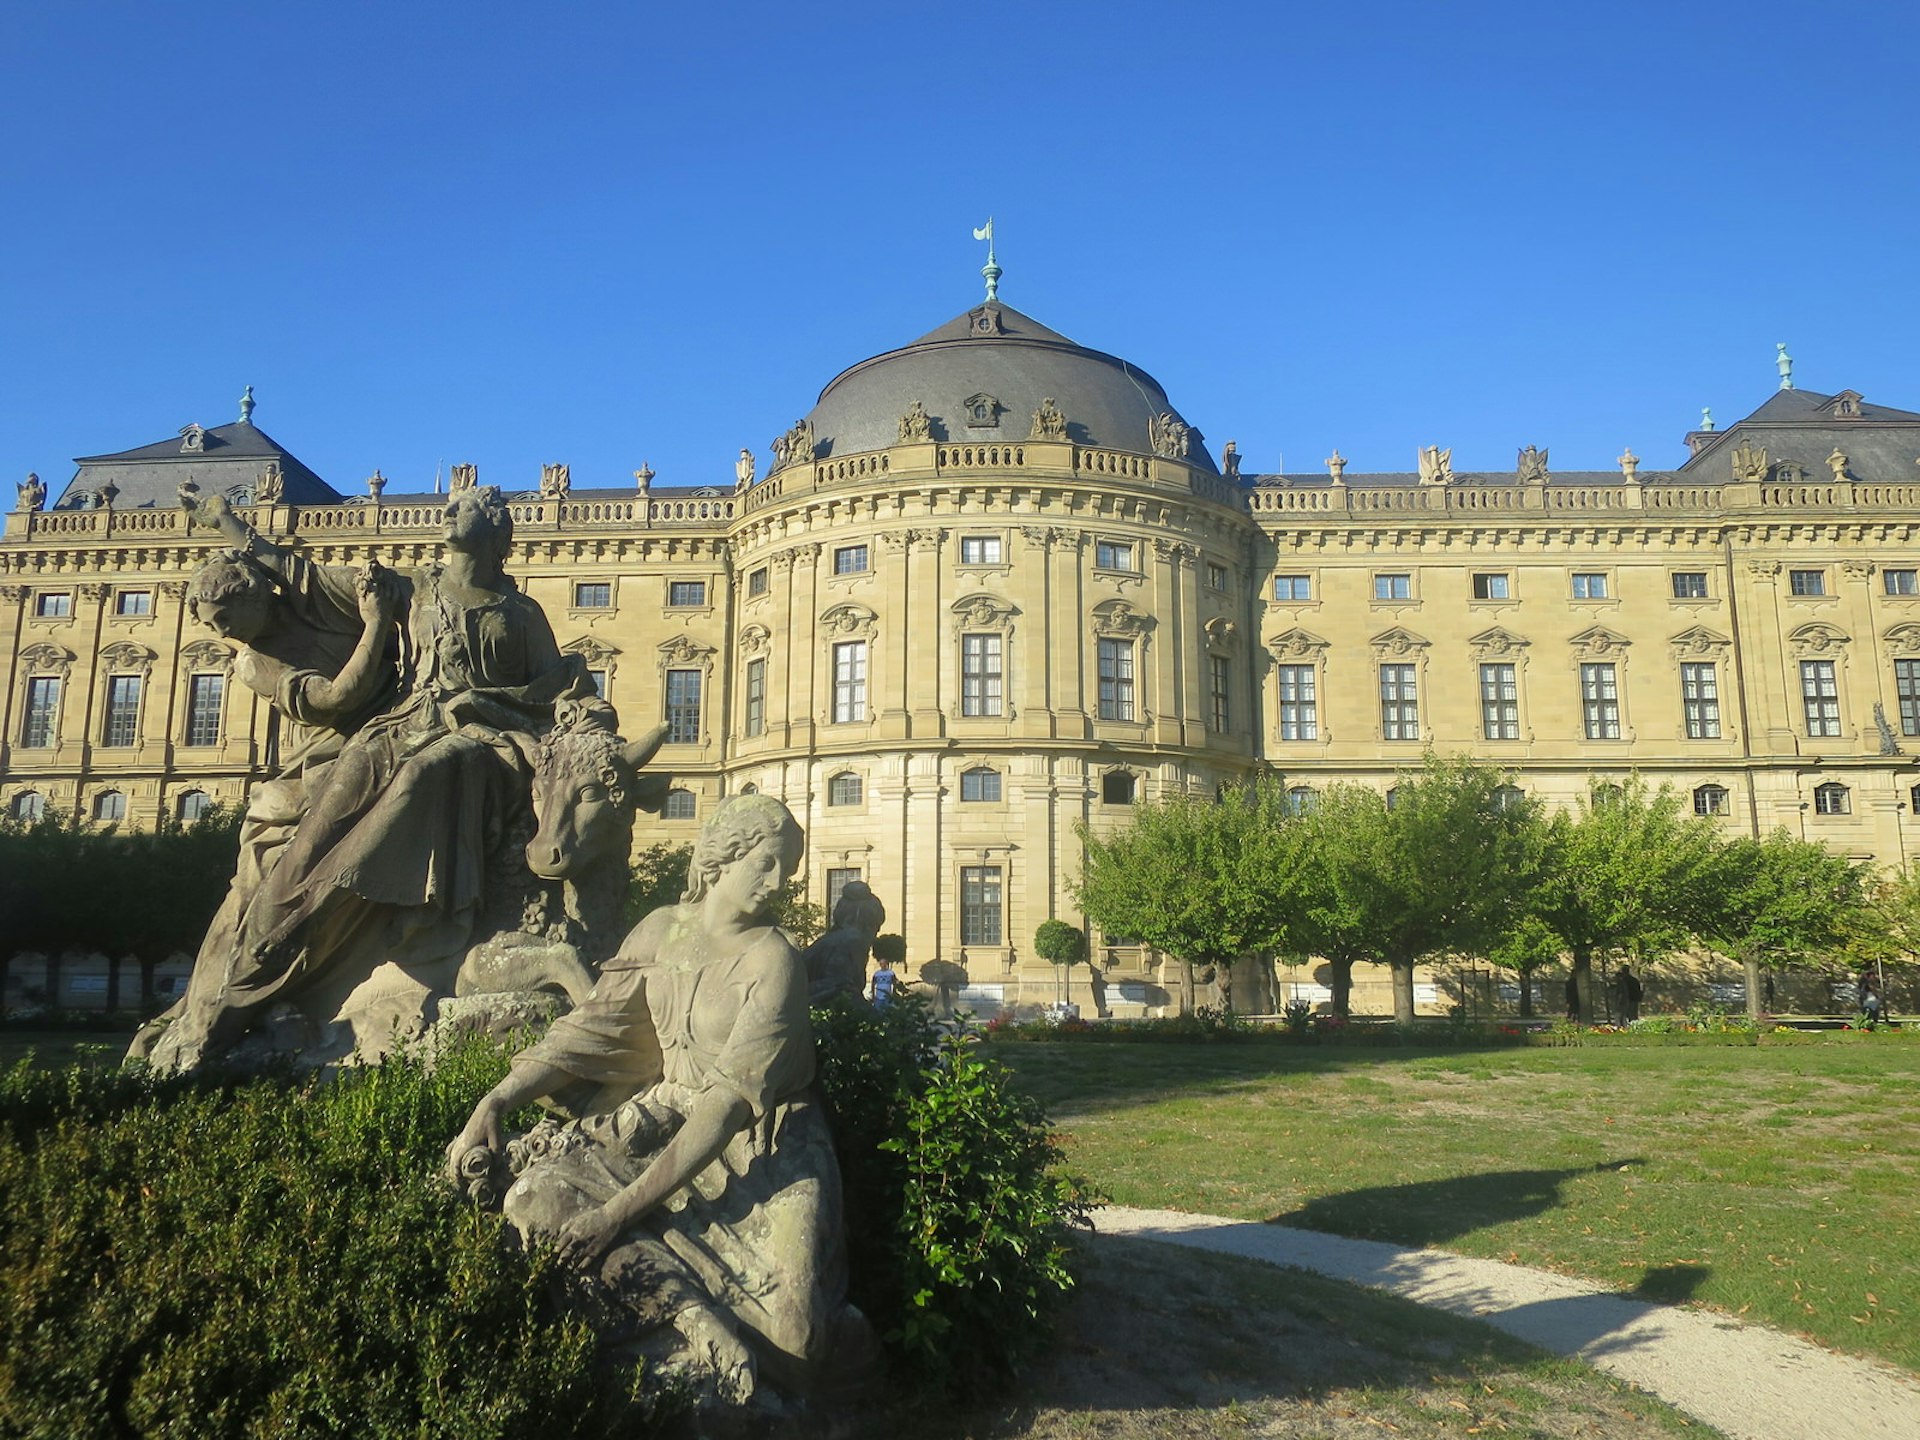 Würzburg Residenz, an impressive palace in Austrian/German baroque style, also inspired by Versailles. The palace lawn is adorned with trees and sculptures. its yellow facade contrasts with the bright blue sky